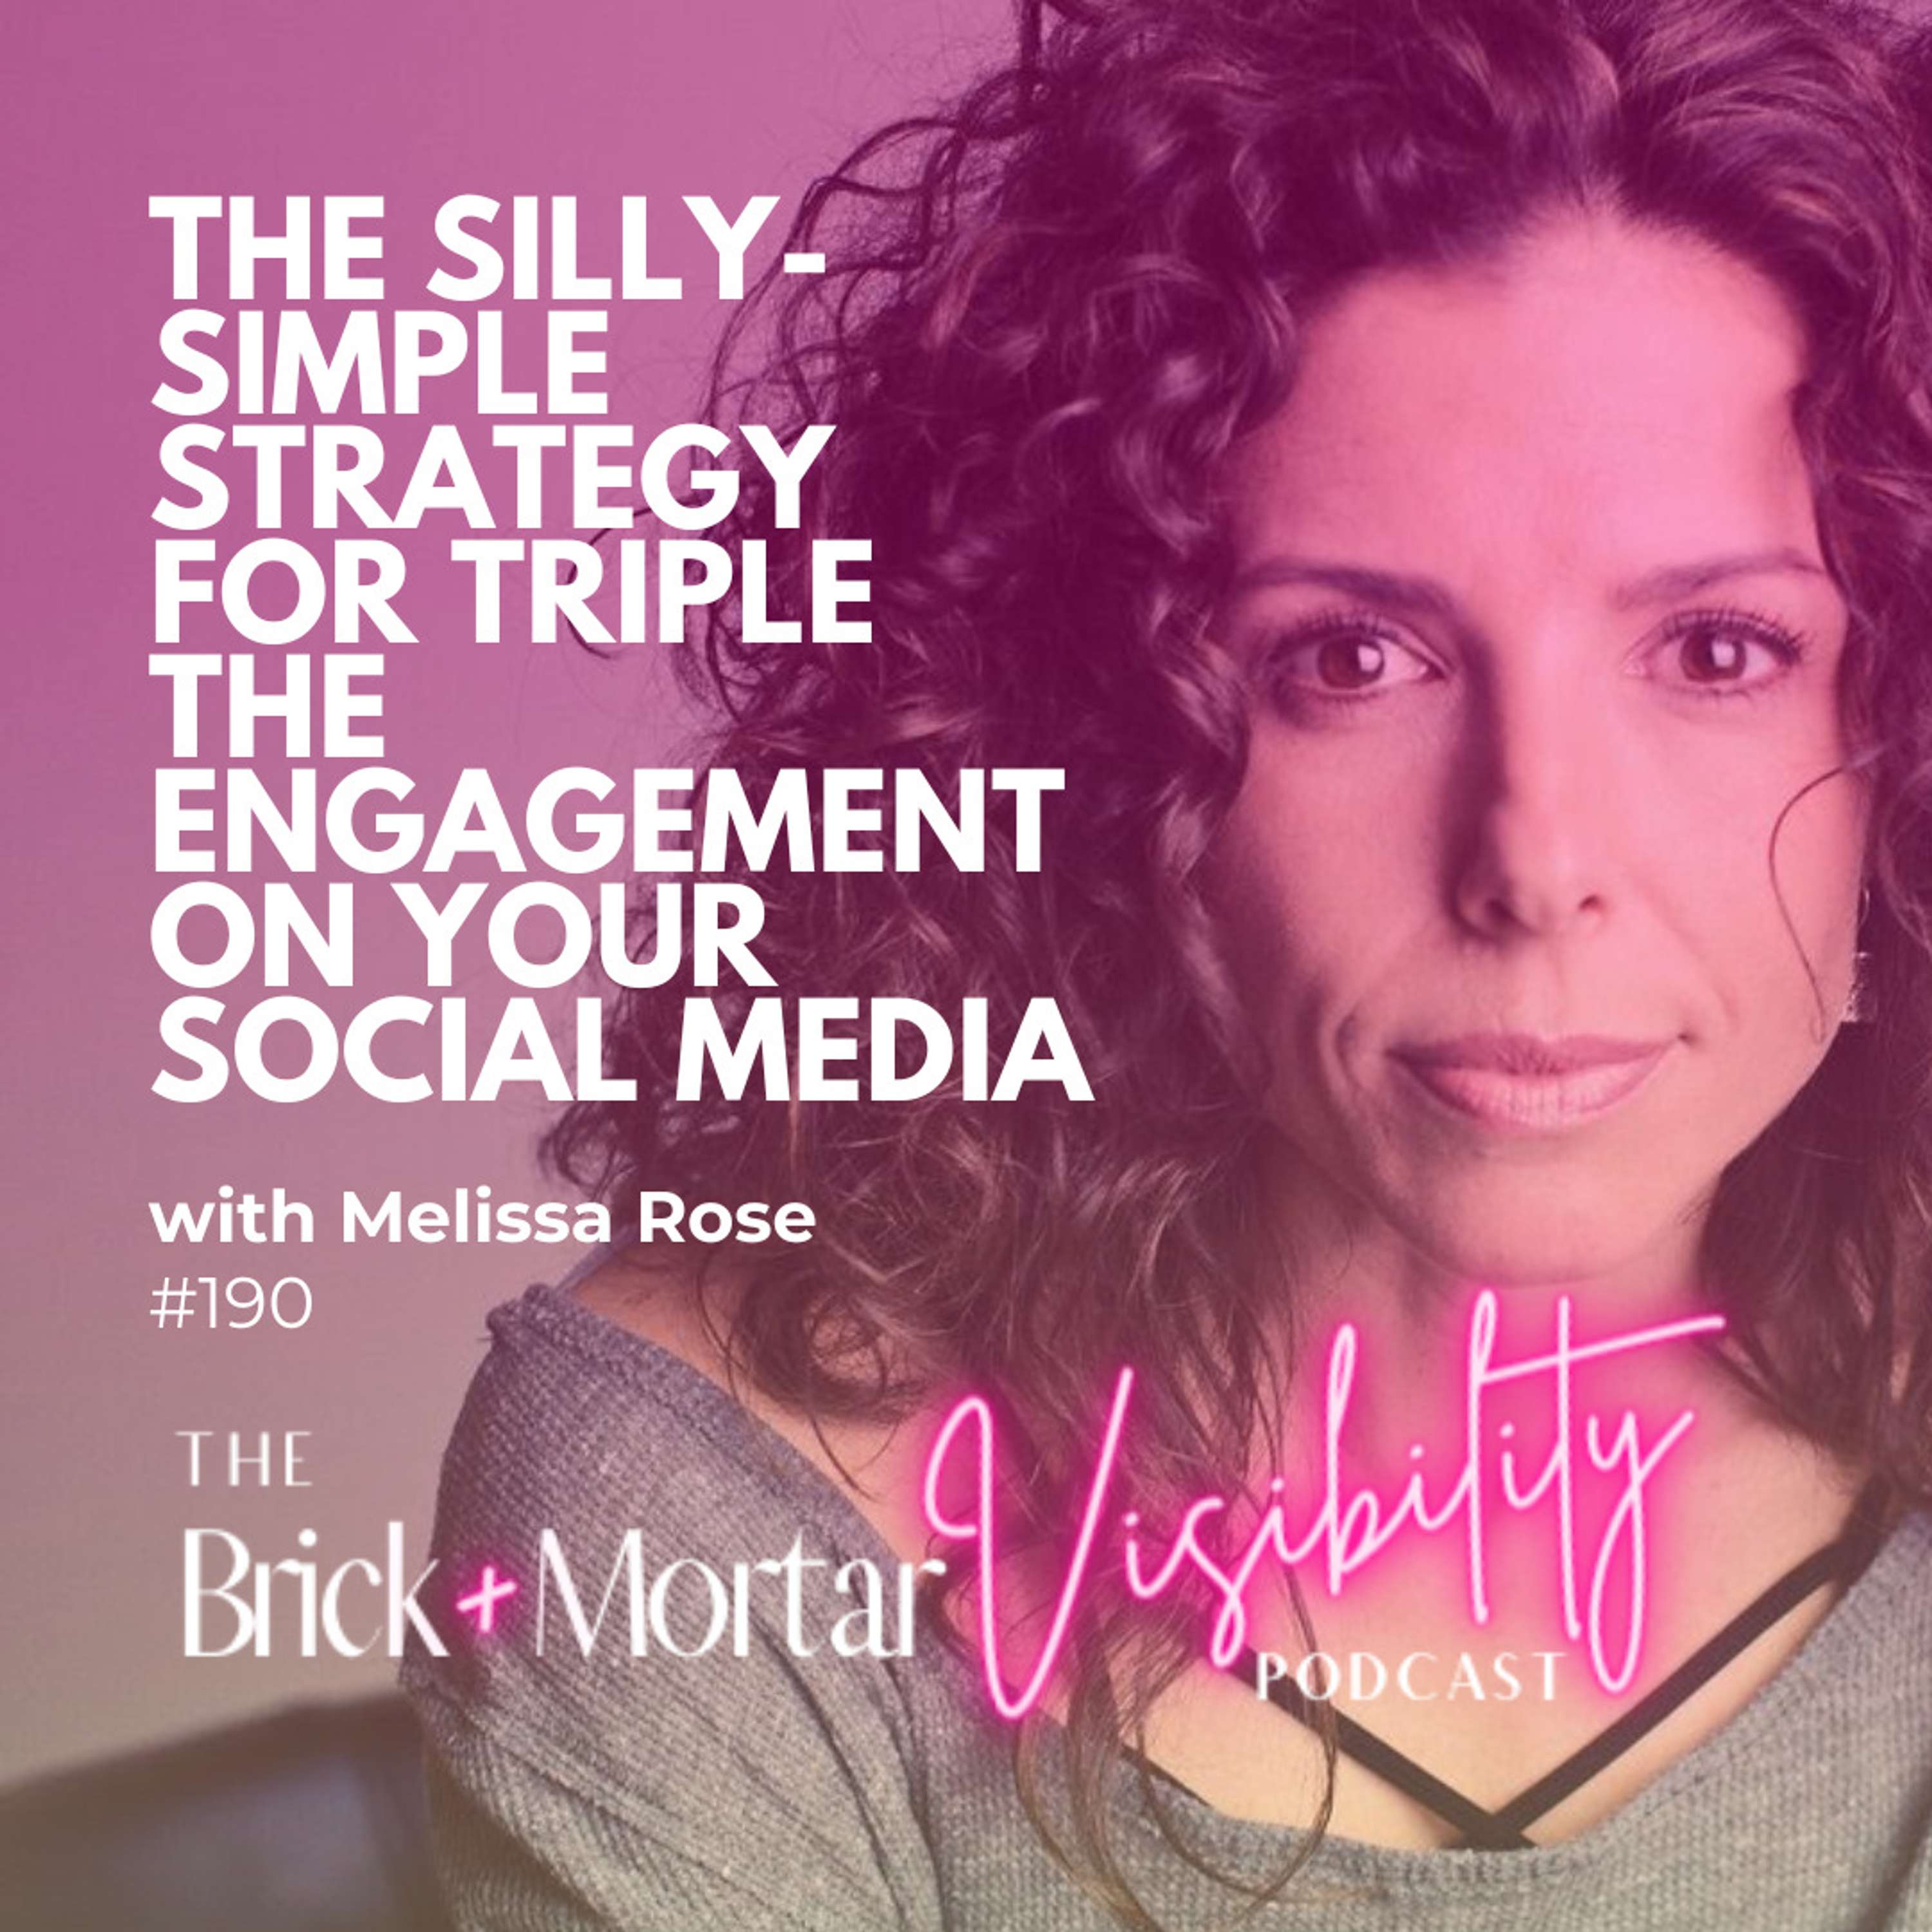 The Silly-Simple Strategy for TRIPLE the Engagement on your Social Media